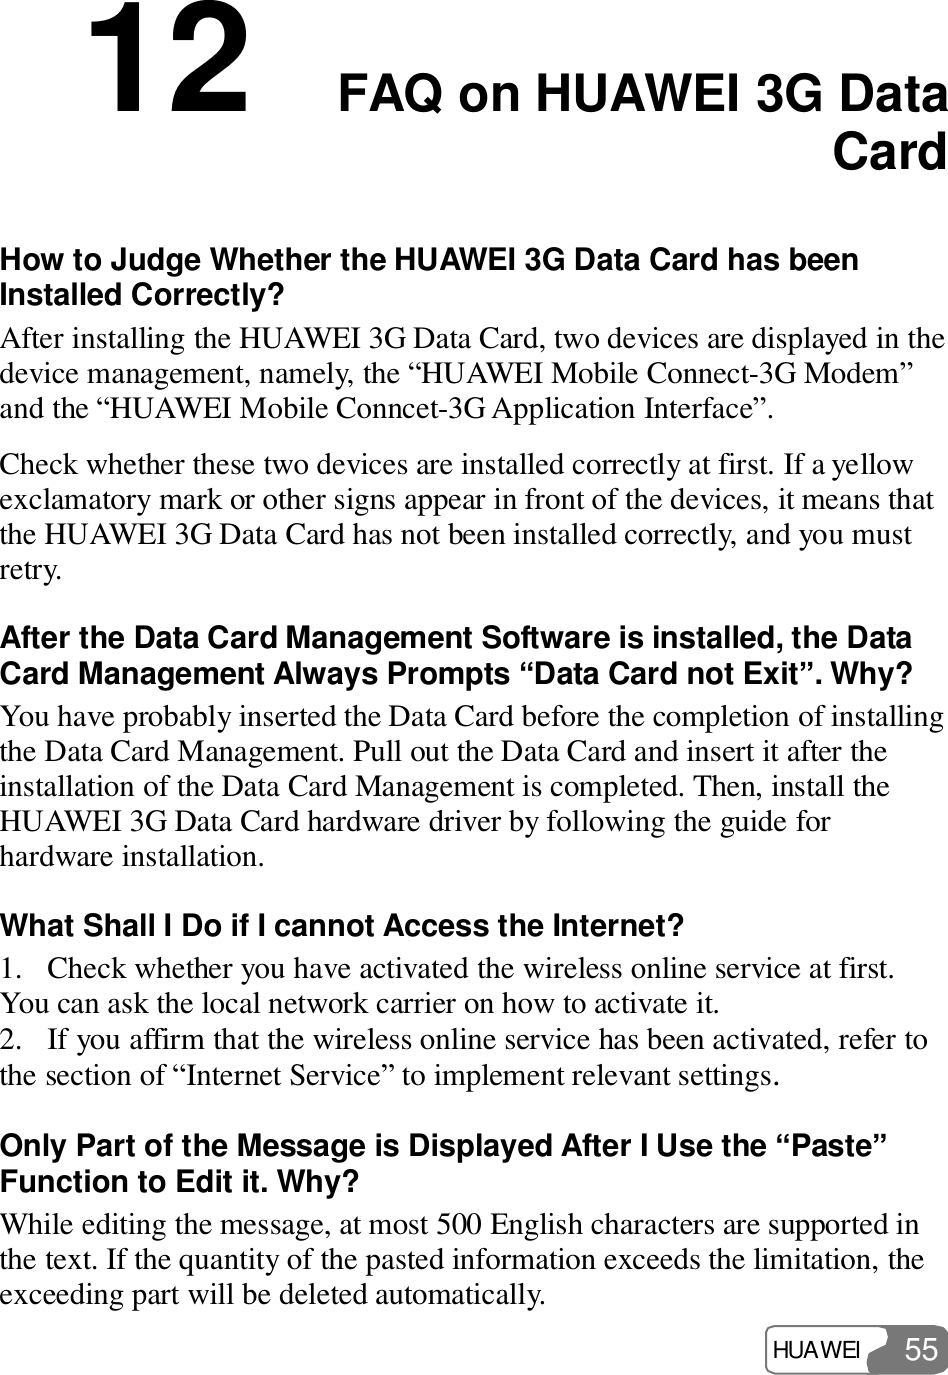  HUAWEI  55 12  FAQ on HUAWEI 3G Data Card How to Judge Whether the HUAWEI 3G Data Card has been Installed Correctly? After installing the HUAWEI 3G Data Card, two devices are displayed in the device management, namely, the “HUAWEI Mobile Connect-3G Modem” and the “HUAWEI Mobile Conncet-3G Application Interface”. Check whether these two devices are installed correctly at first. If a yellow exclamatory mark or other signs appear in front of the devices, it means that the HUAWEI 3G Data Card has not been installed correctly, and you must retry. After the Data Card Management Software is installed, the Data Card Management Always Prompts “Data Card not Exit”. Why? You have probably inserted the Data Card before the completion of installing the Data Card Management. Pull out the Data Card and insert it after the installation of the Data Card Management is completed. Then, install the HUAWEI 3G Data Card hardware driver by following the guide for hardware installation. What Shall I Do if I cannot Access the Internet? 1. Check whether you have activated the wireless online service at first. You can ask the local network carrier on how to activate it. 2. If you affirm that the wireless online service has been activated, refer to the section of “Internet Service” to implement relevant settings. Only Part of the Message is Displayed After I Use the “Paste” Function to Edit it. Why? While editing the message, at most 500 English characters are supported in the text. If the quantity of the pasted information exceeds the limitation, the exceeding part will be deleted automatically. 